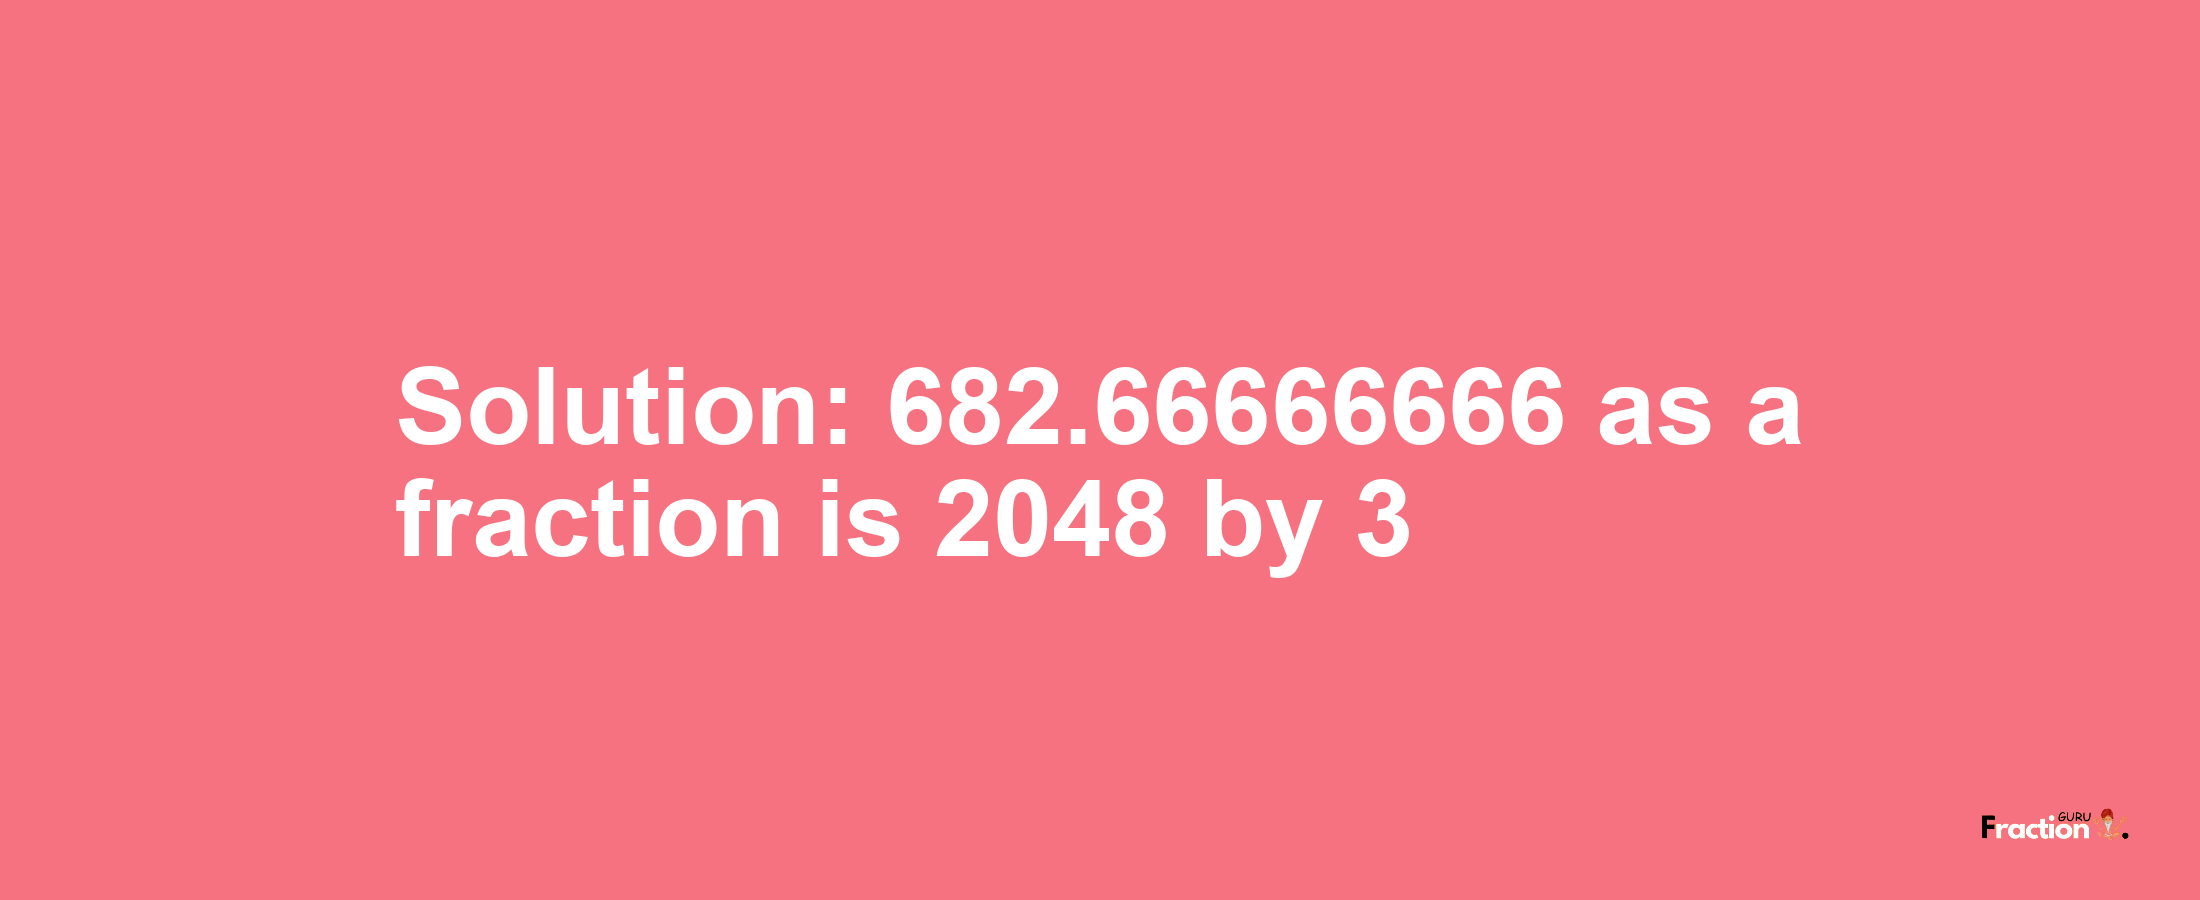 Solution:682.66666666 as a fraction is 2048/3